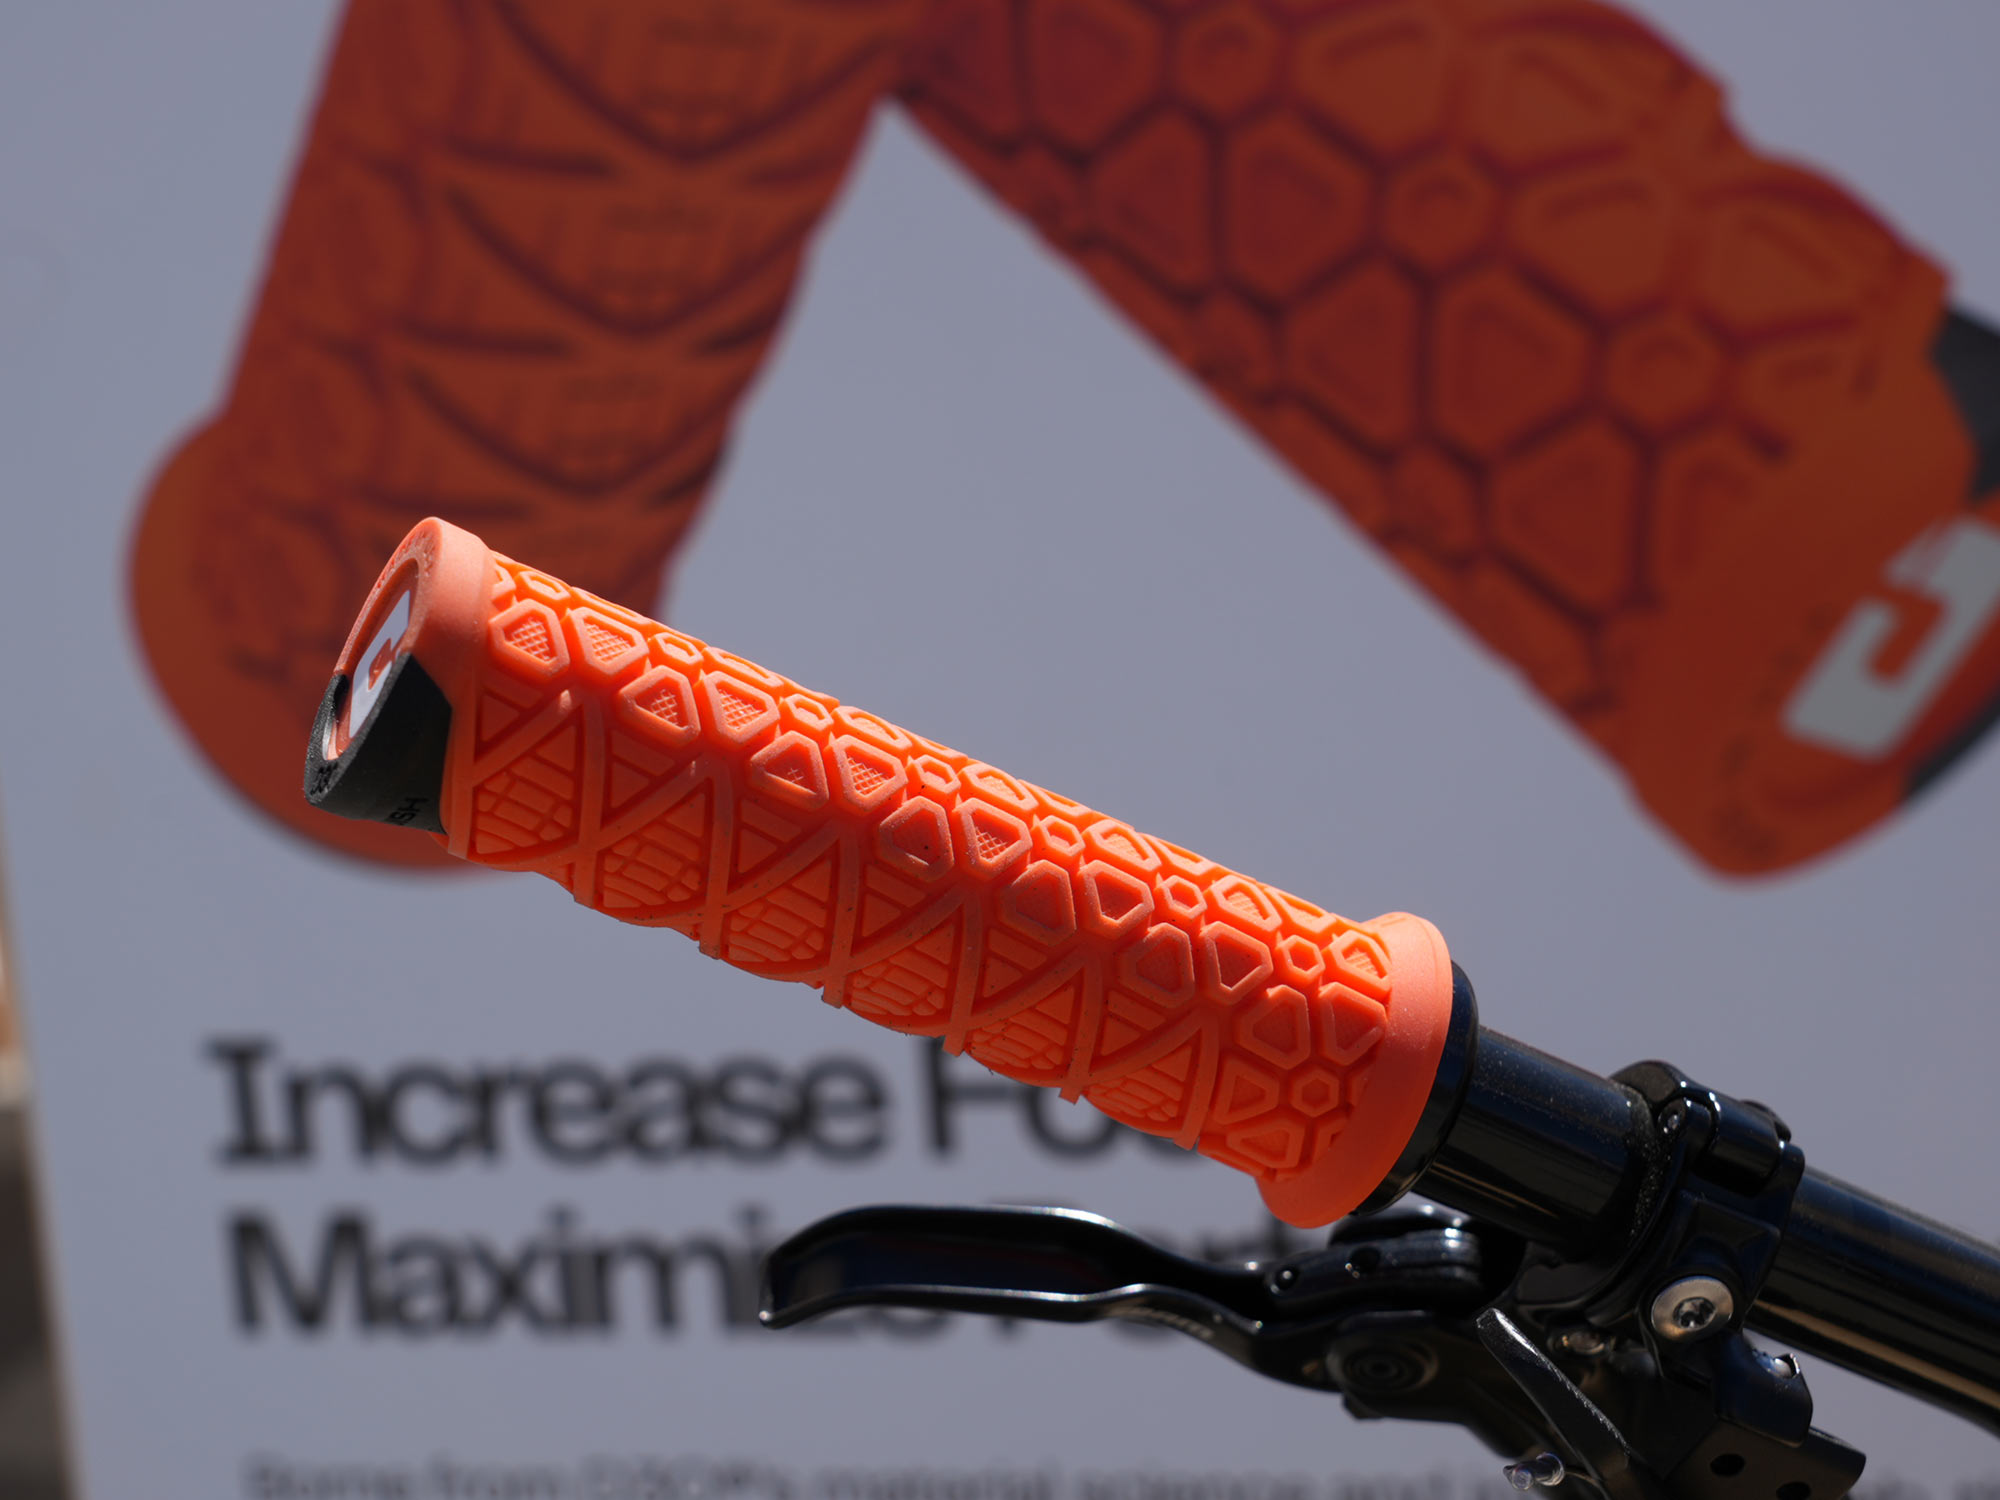 odi mountain bike grips with d30 vibration damping material